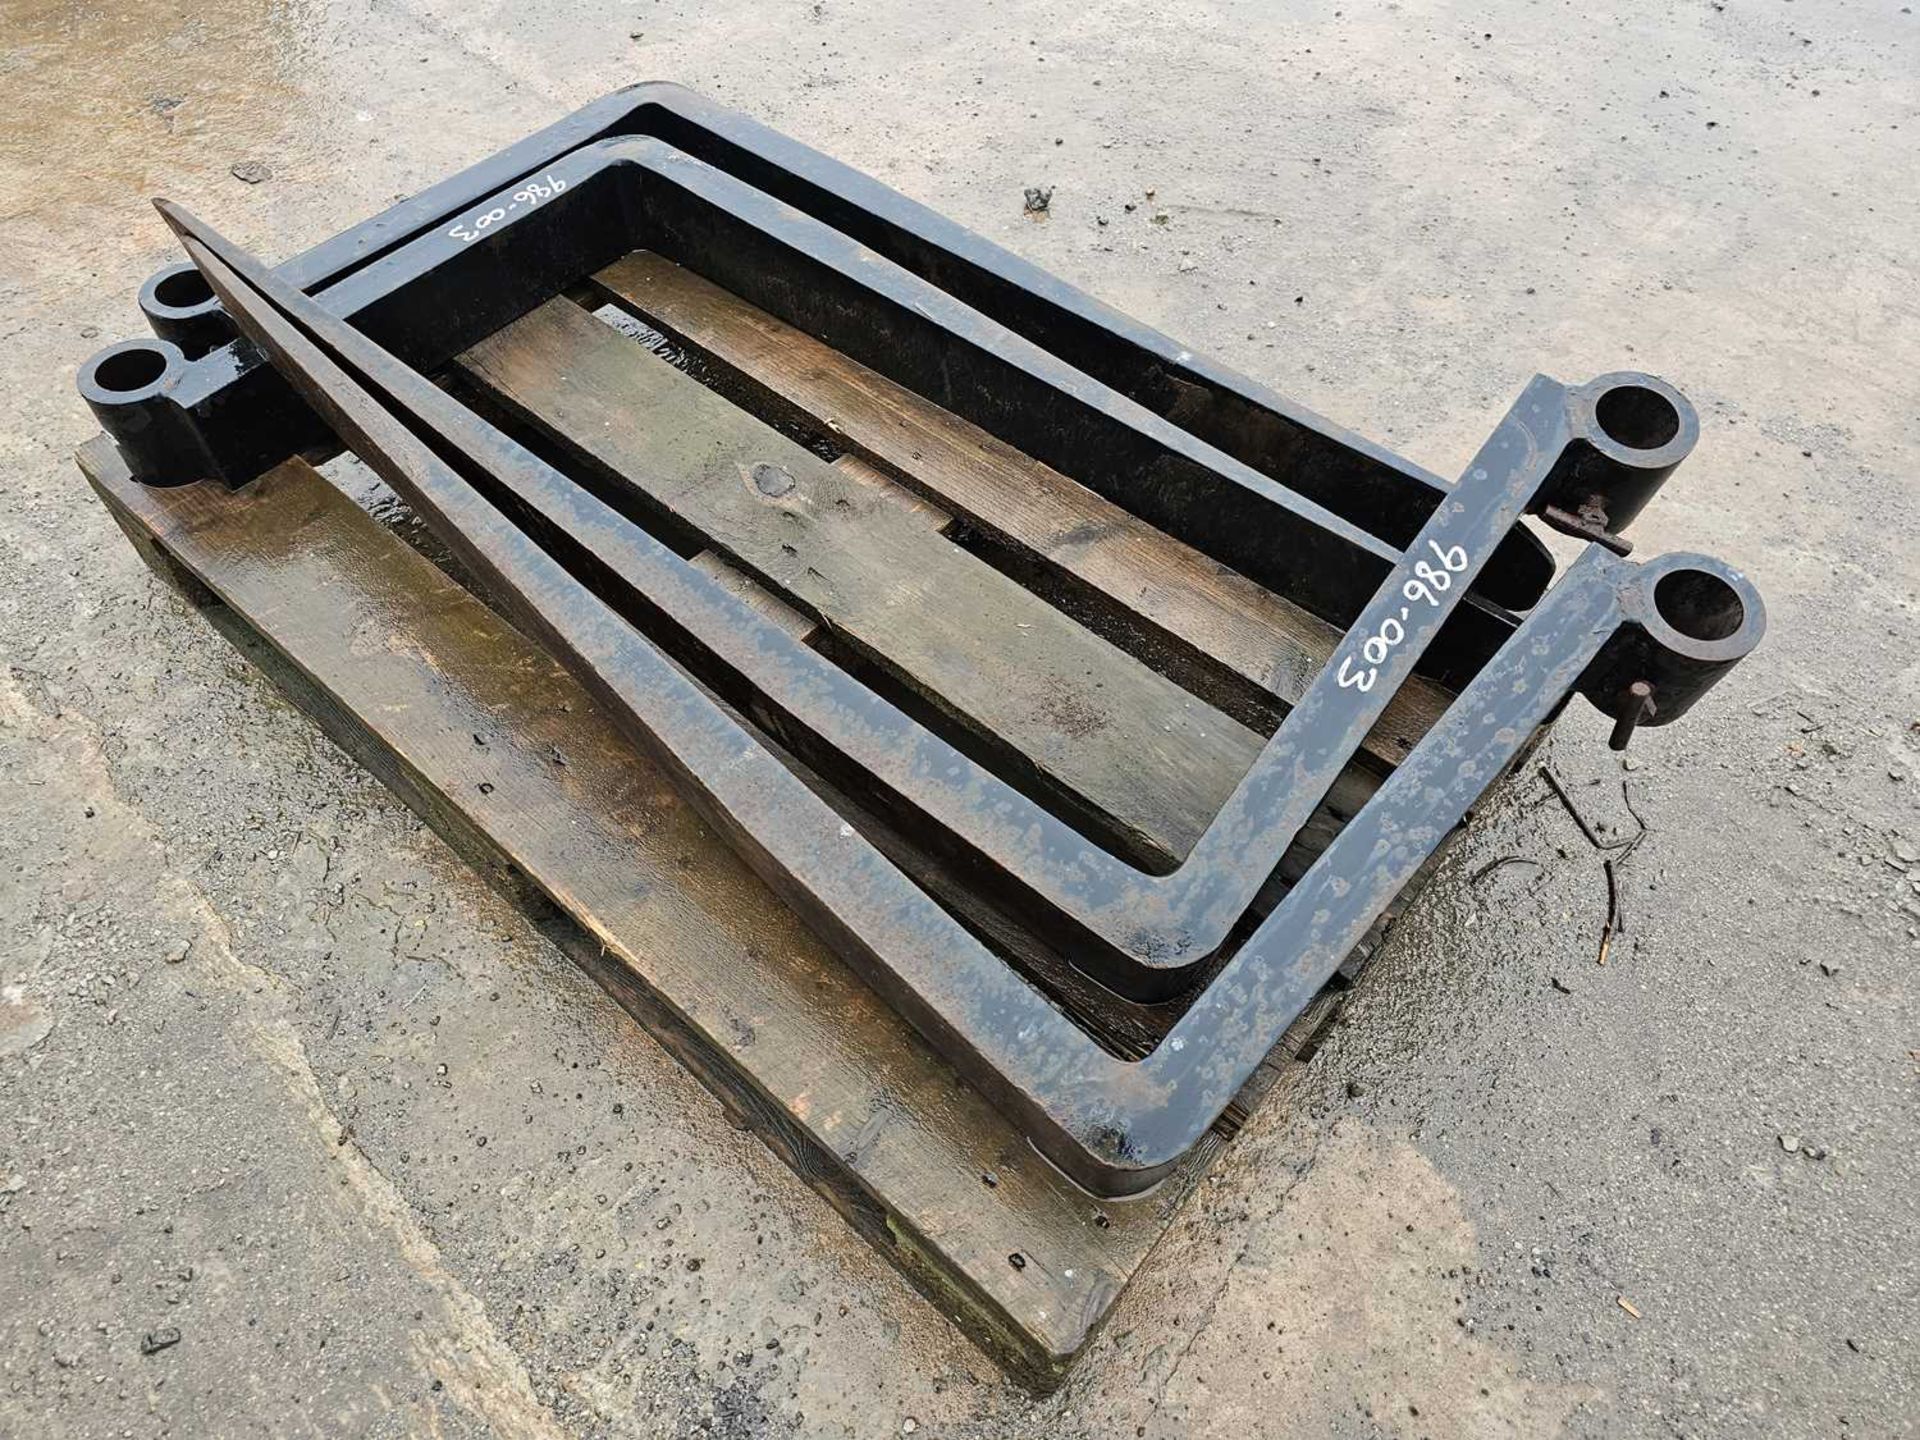 Forks to suit JCB Telehandler (2 x Pair of) - Image 2 of 4